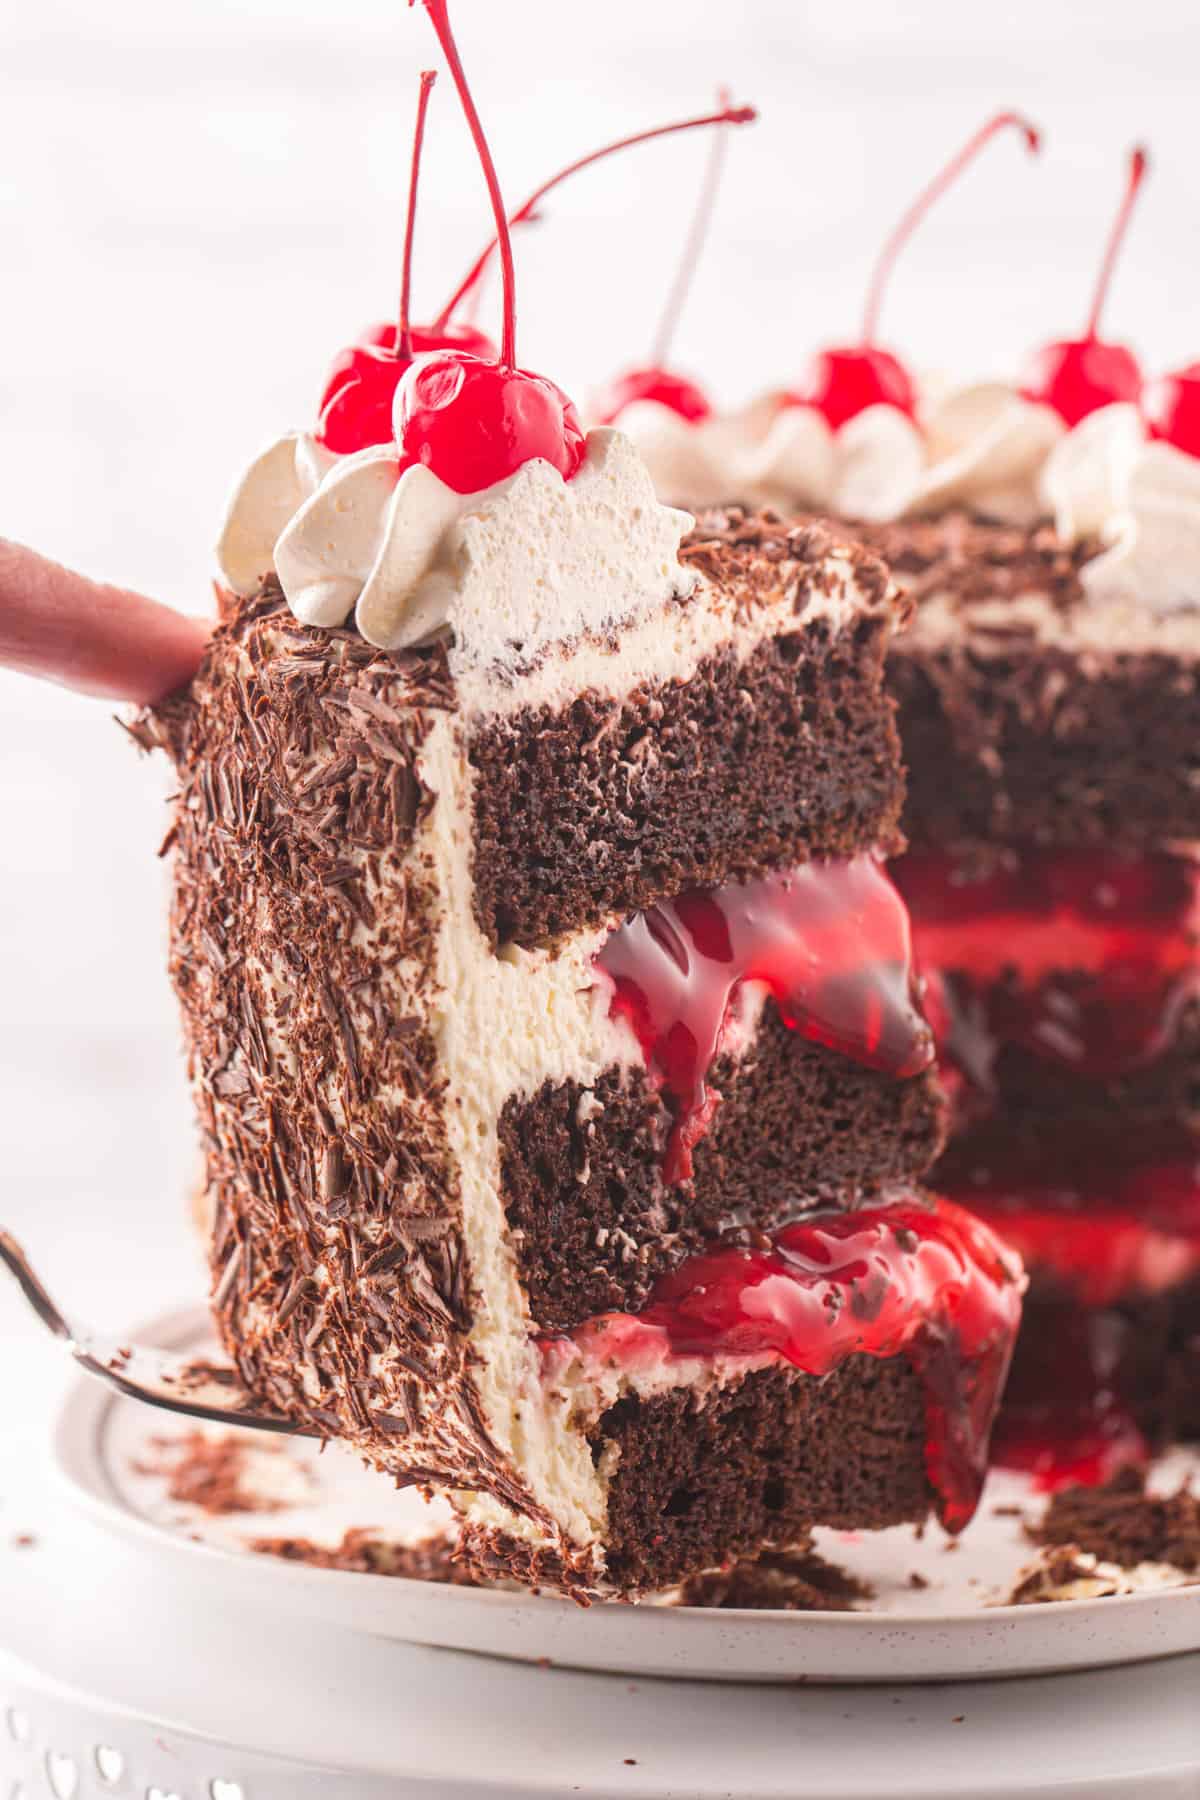 A slice of black forest cake is being removed from the cake stand.